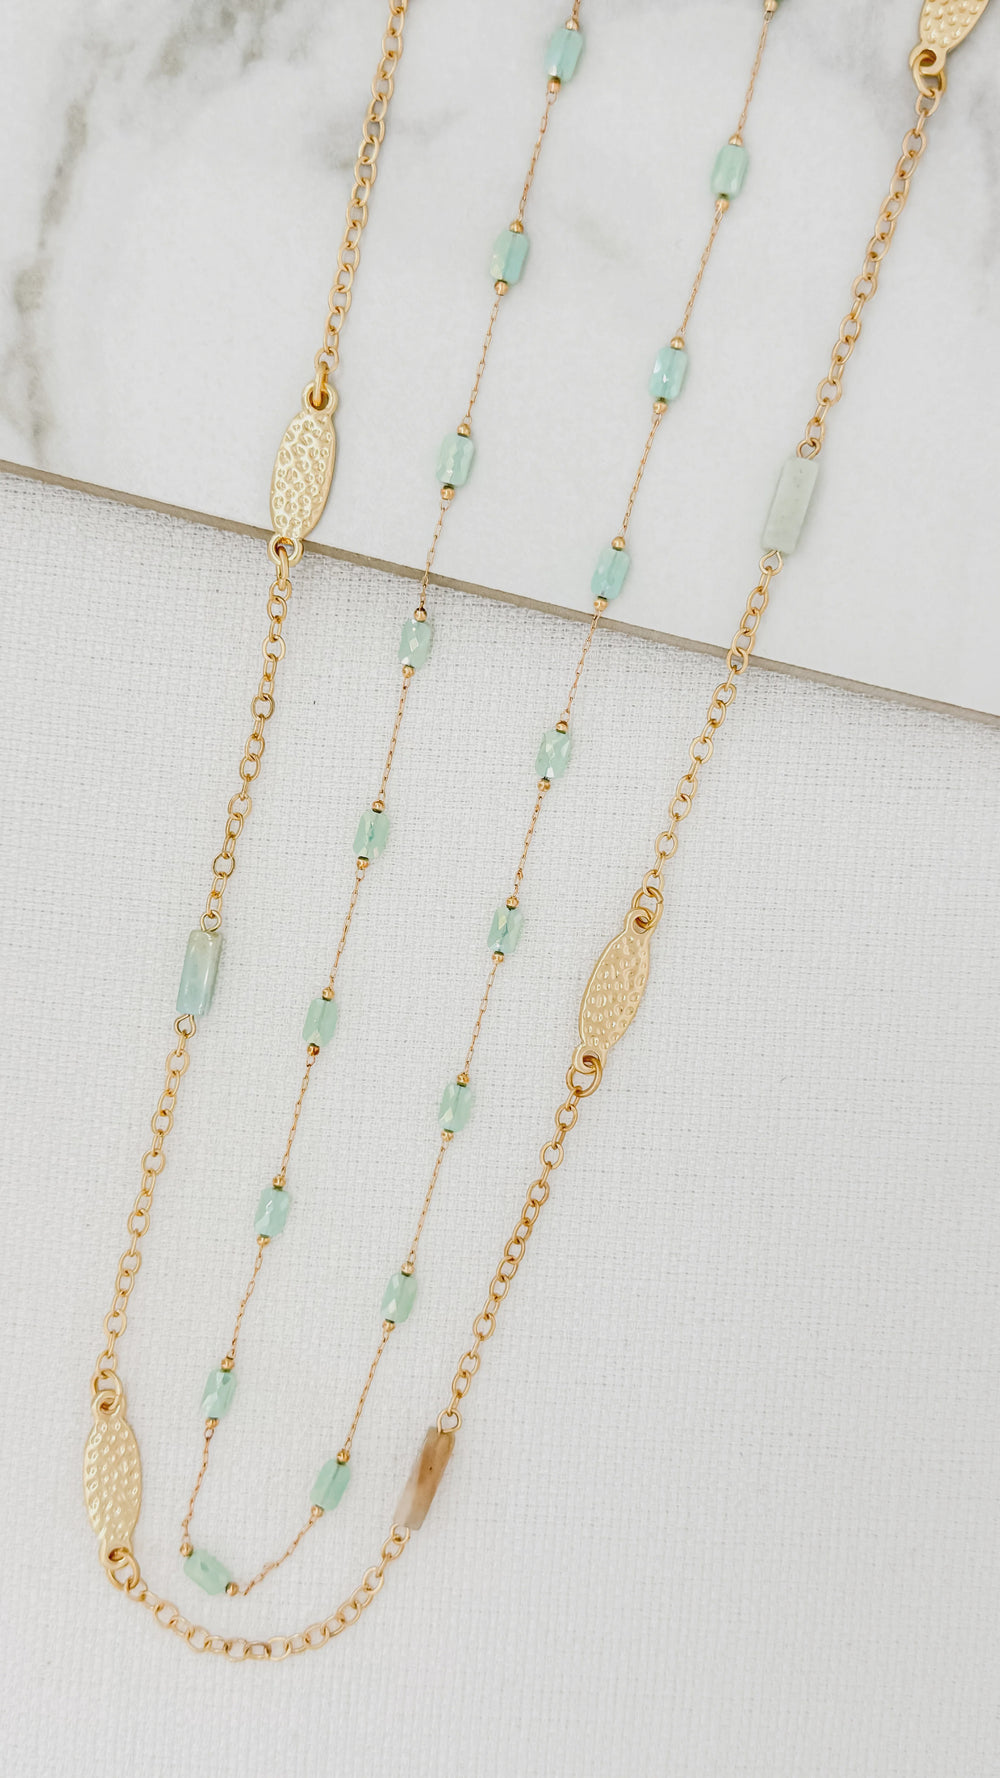 Long Gold Double Chain Necklace - Turquoise Beads